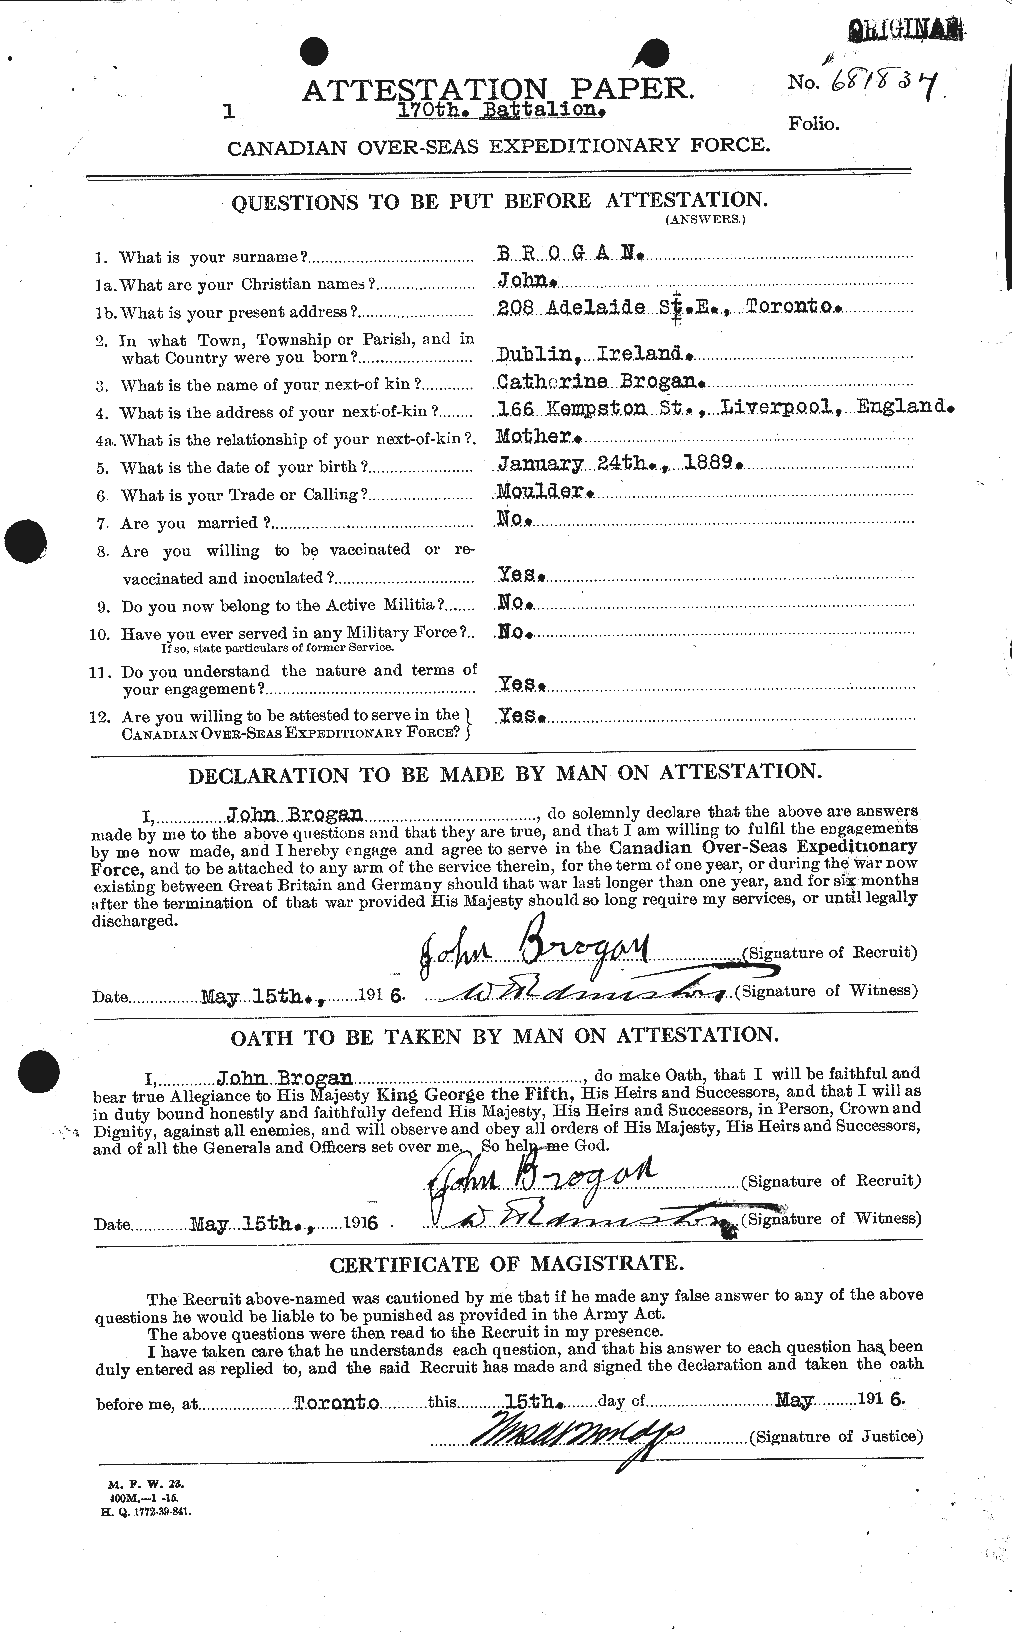 Personnel Records of the First World War - CEF 262059a